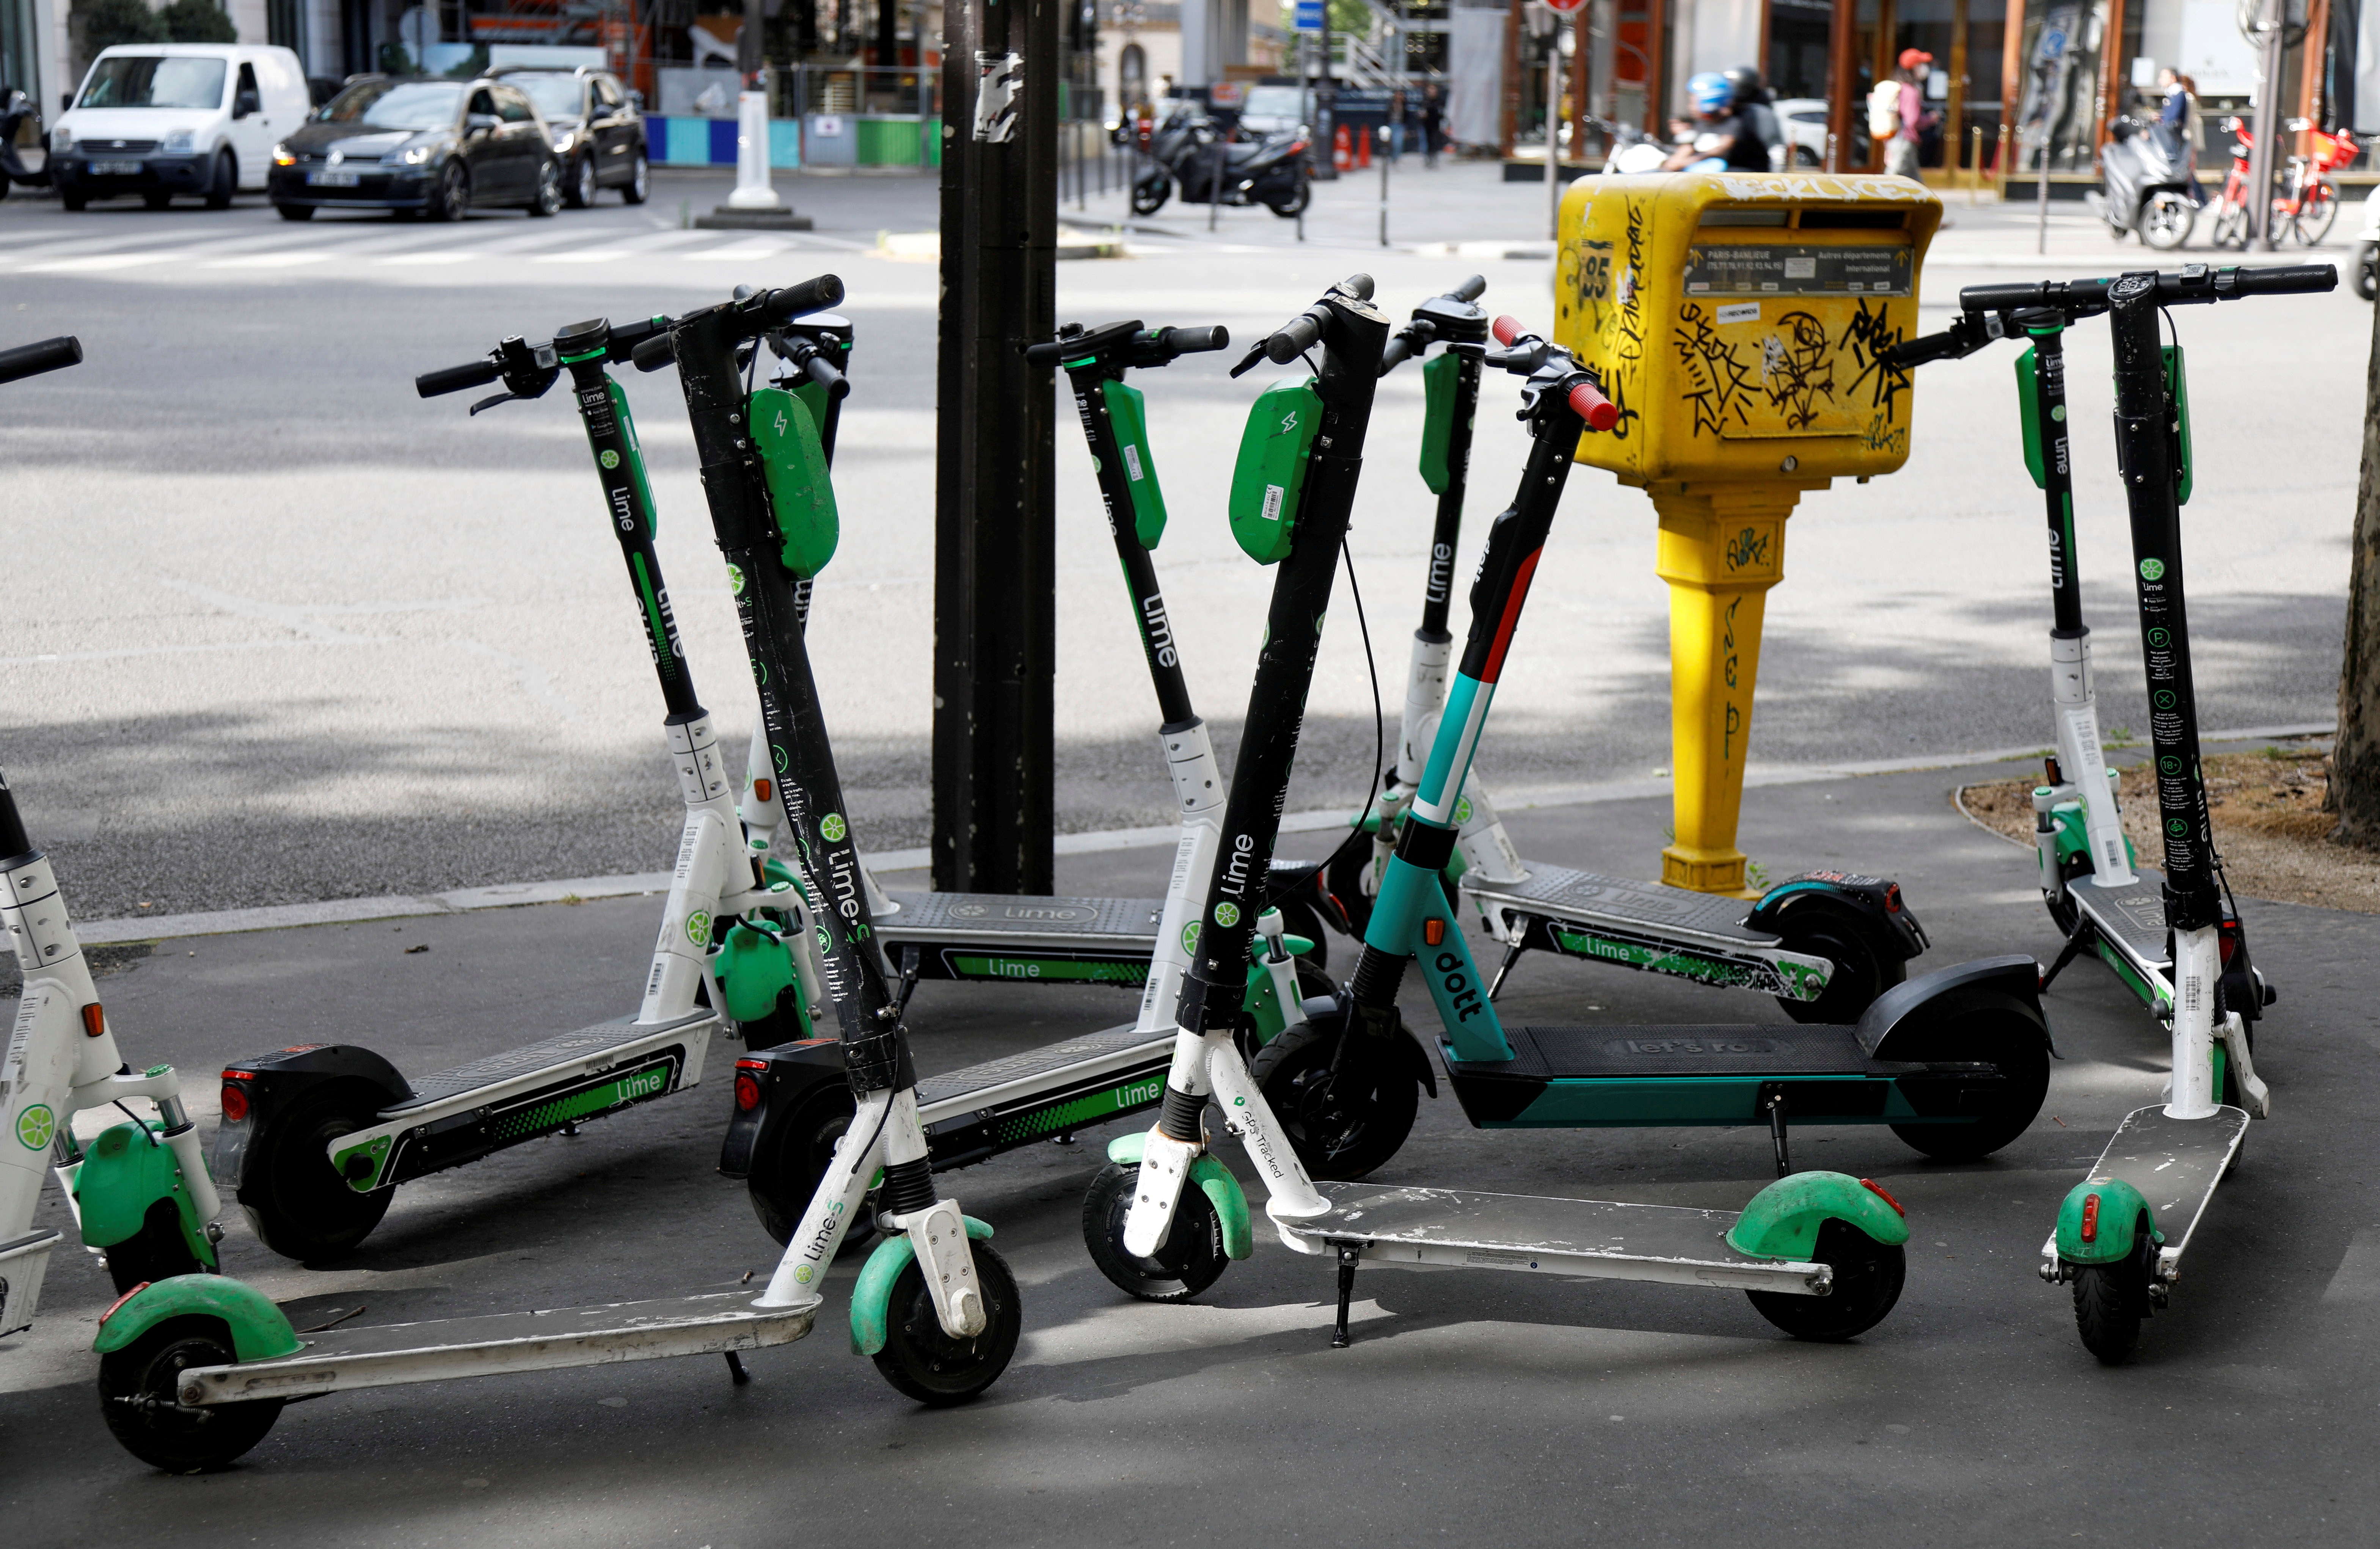 Dock-free electric scooters Lime-S by California-based bicycle sharing service Lime are parked for rent in Paris